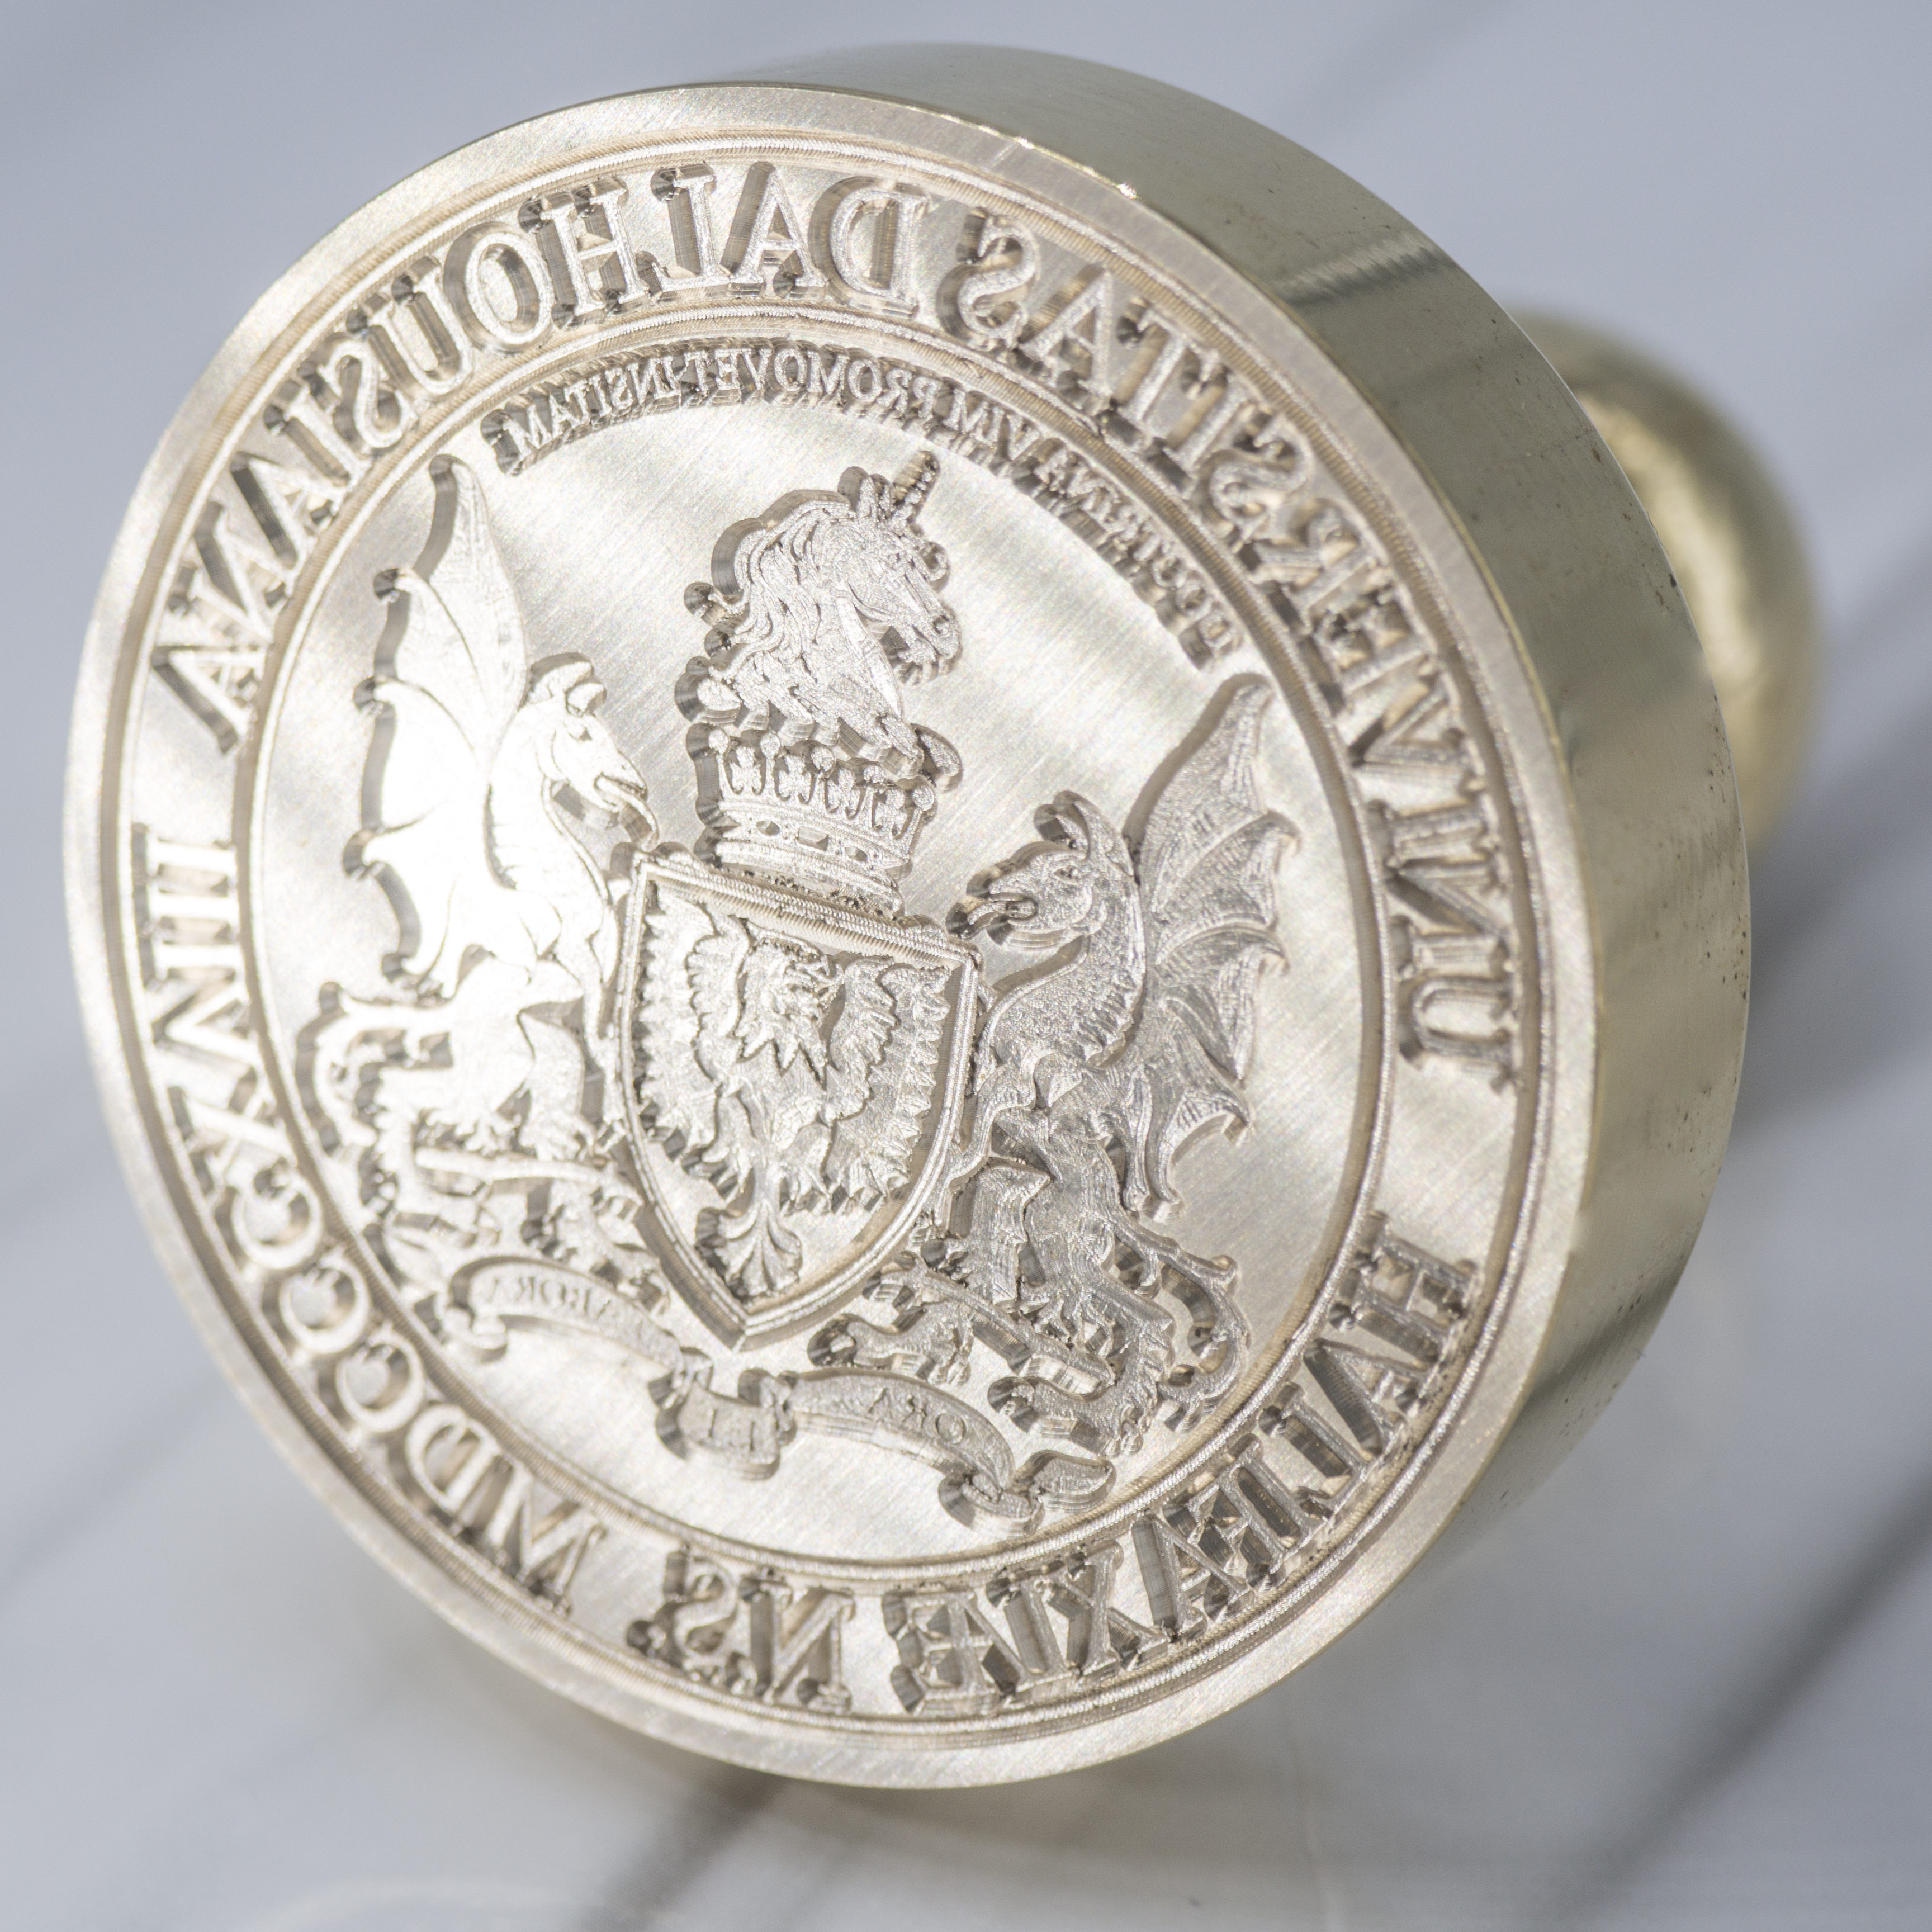 Custom Wax Seal Stamp - Custom Family Crest Wax Seal Stamp with Name, Initial, or Totem - Style 3